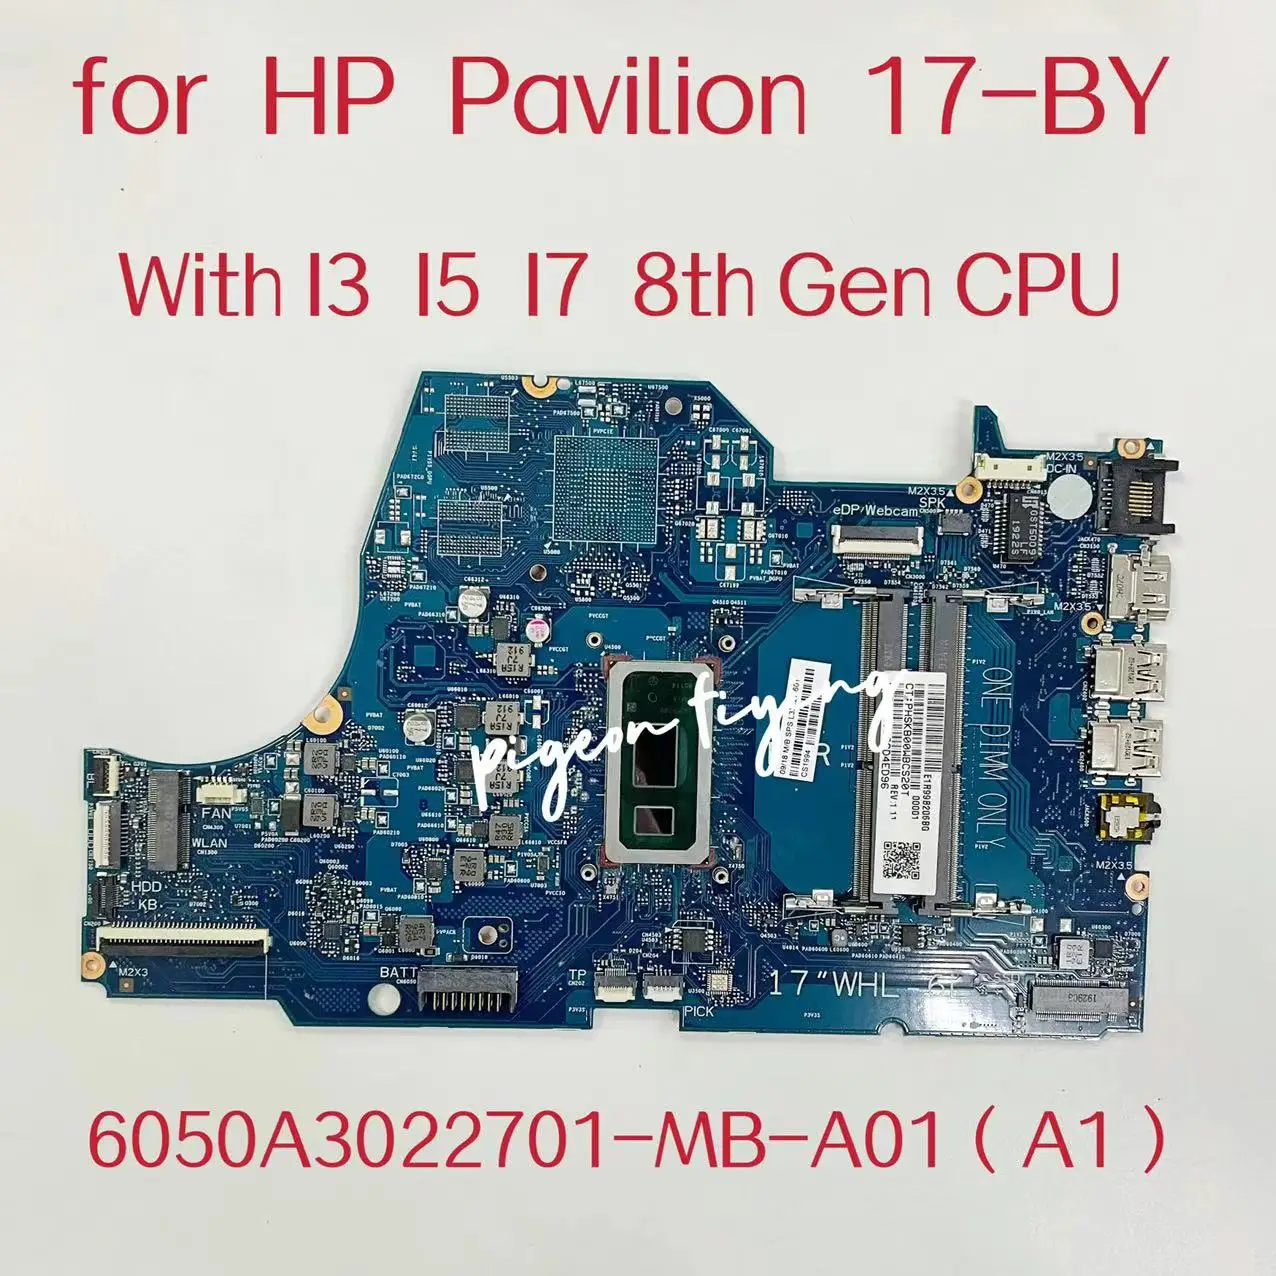 

6050A3022701-MB-A01 Mainboard for HP Pavilion 17-BY Laptop MotherboardWith I3 I5 I7 8th Gen CPU UMA DDR4 L32627--601 L32627--001